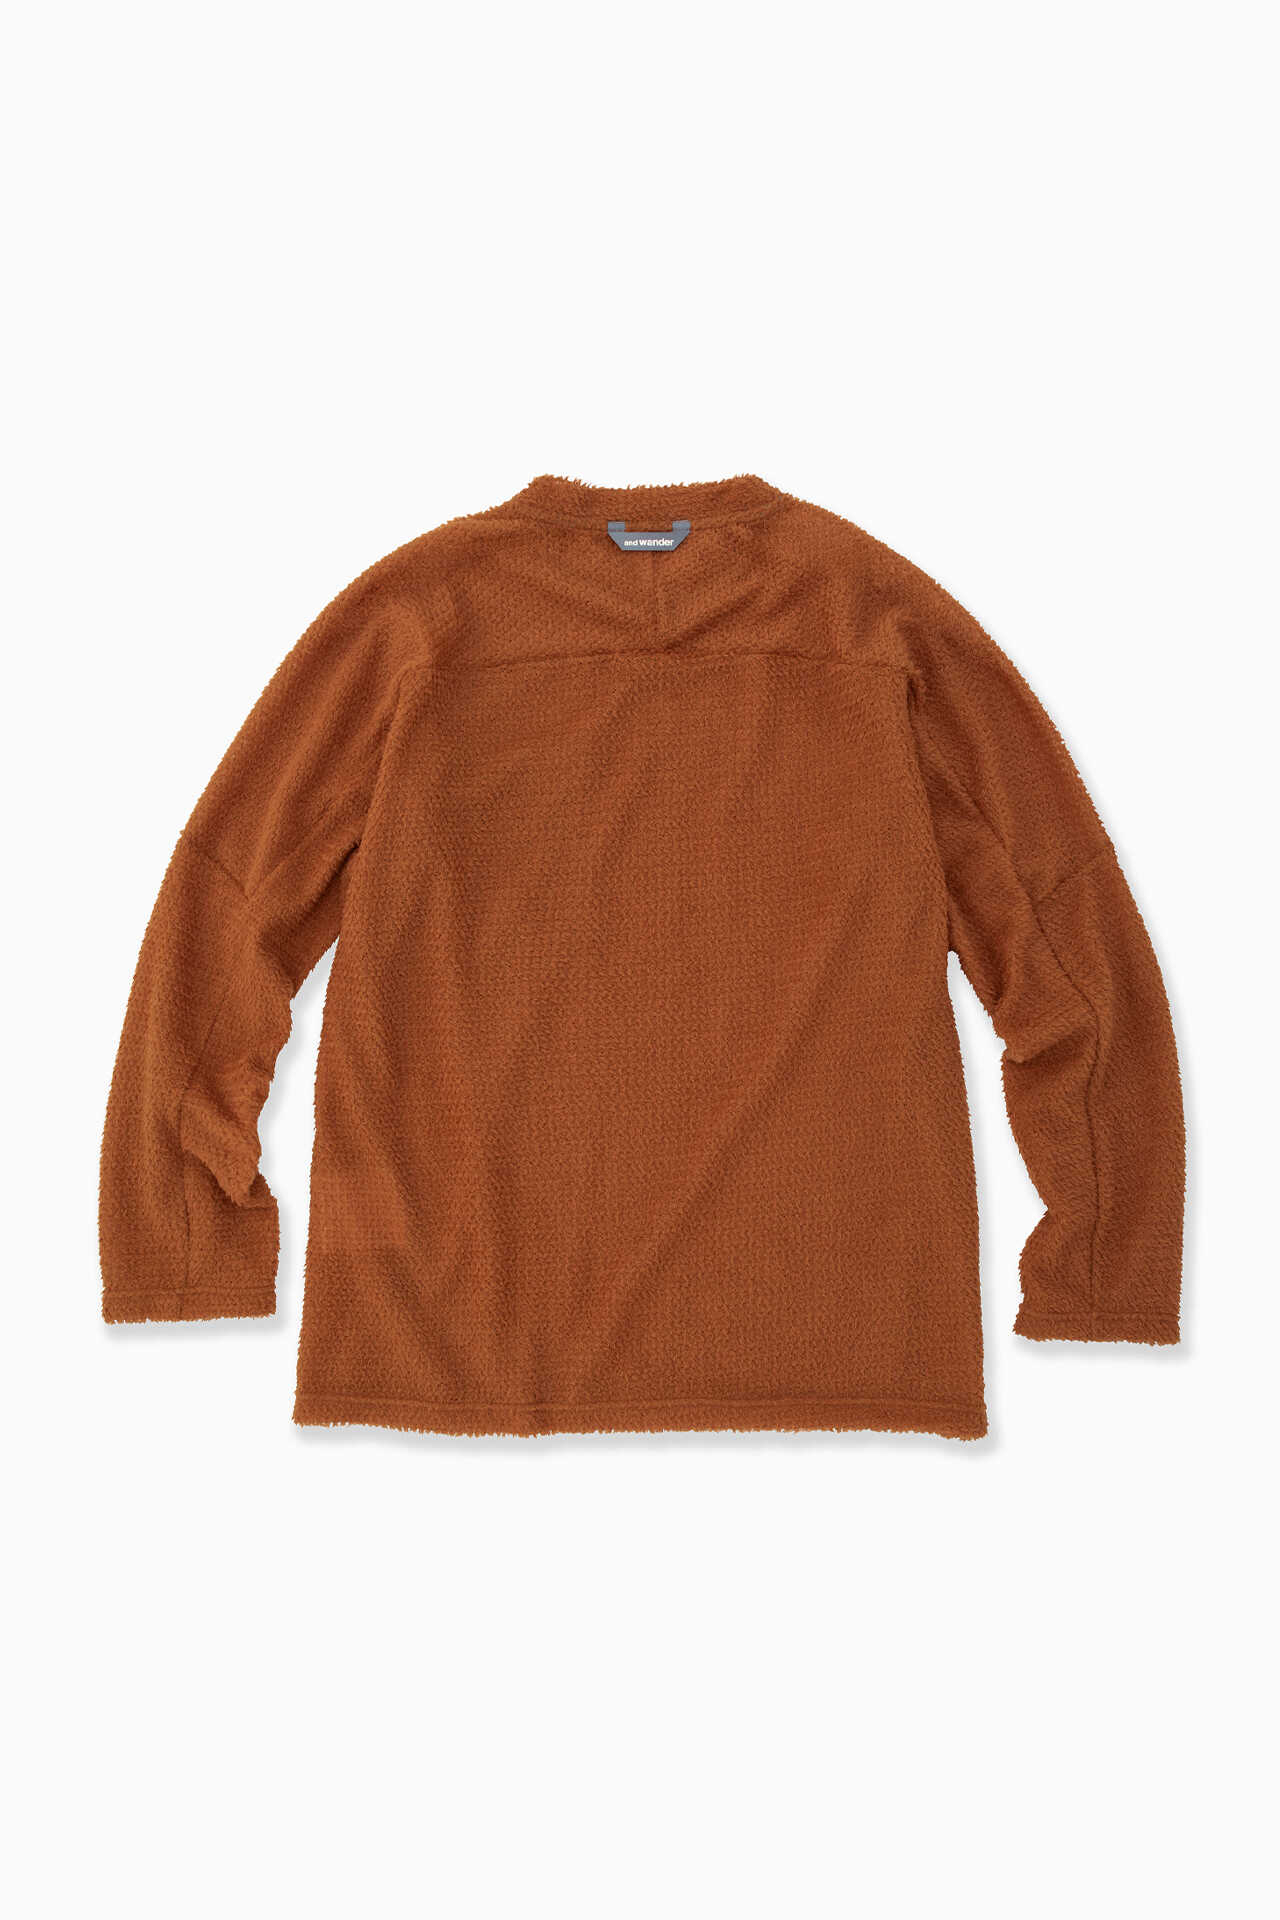 alpha direct pullover | cut_knit | and wander ONLINE STORE